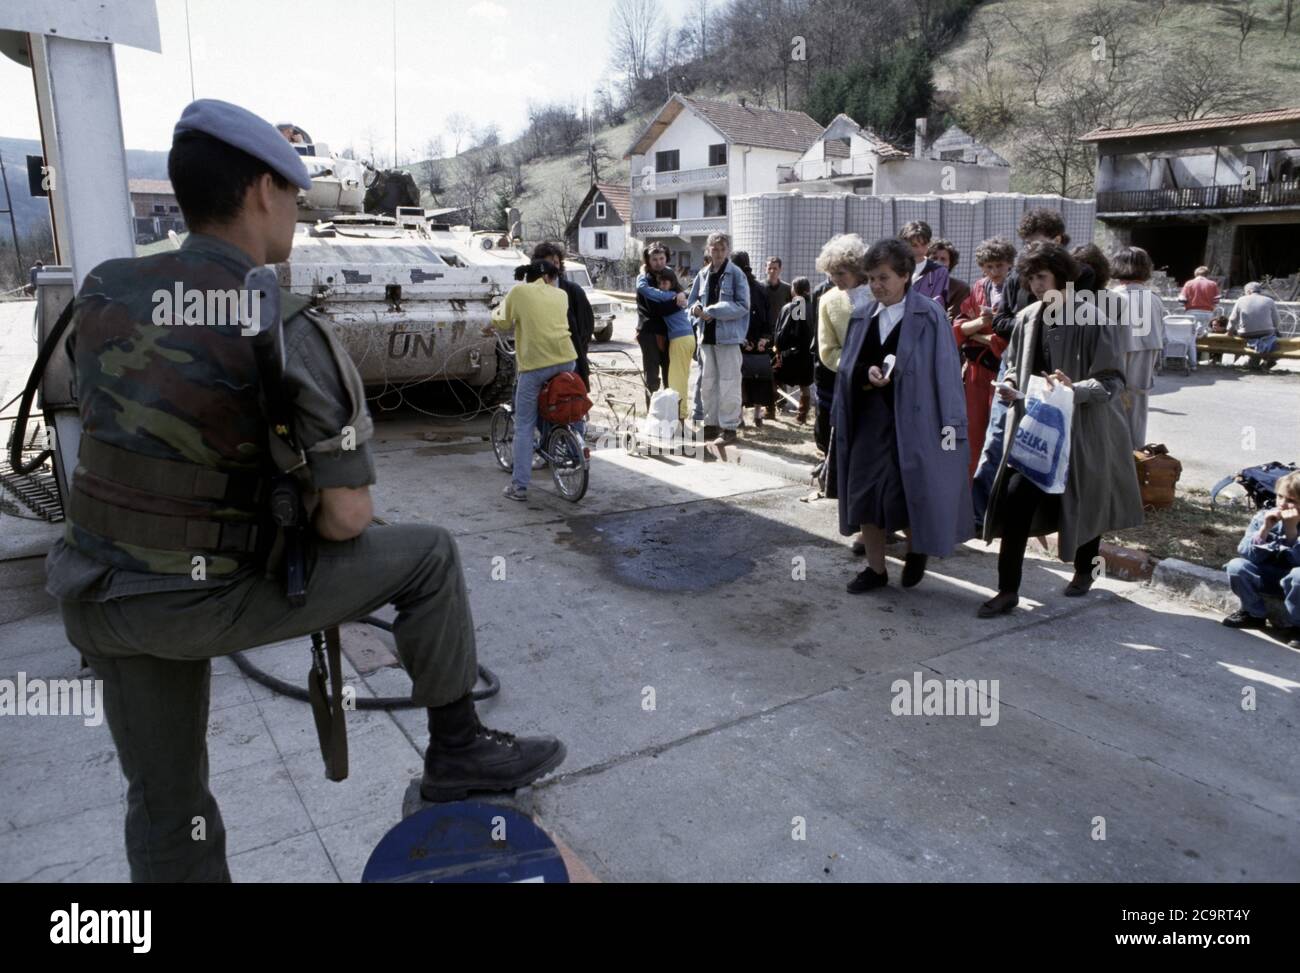 26th March 1994 During the war in Bosnia: a group of Muslim women have just arrived by bus at a joint Bosnian Croat/Bosnian Muslim/UN checkpoint, set up a few kilometres south-east of Vitez under the recent agreement that the warring factions dismantle their unilateral checkpoints. Stock Photo